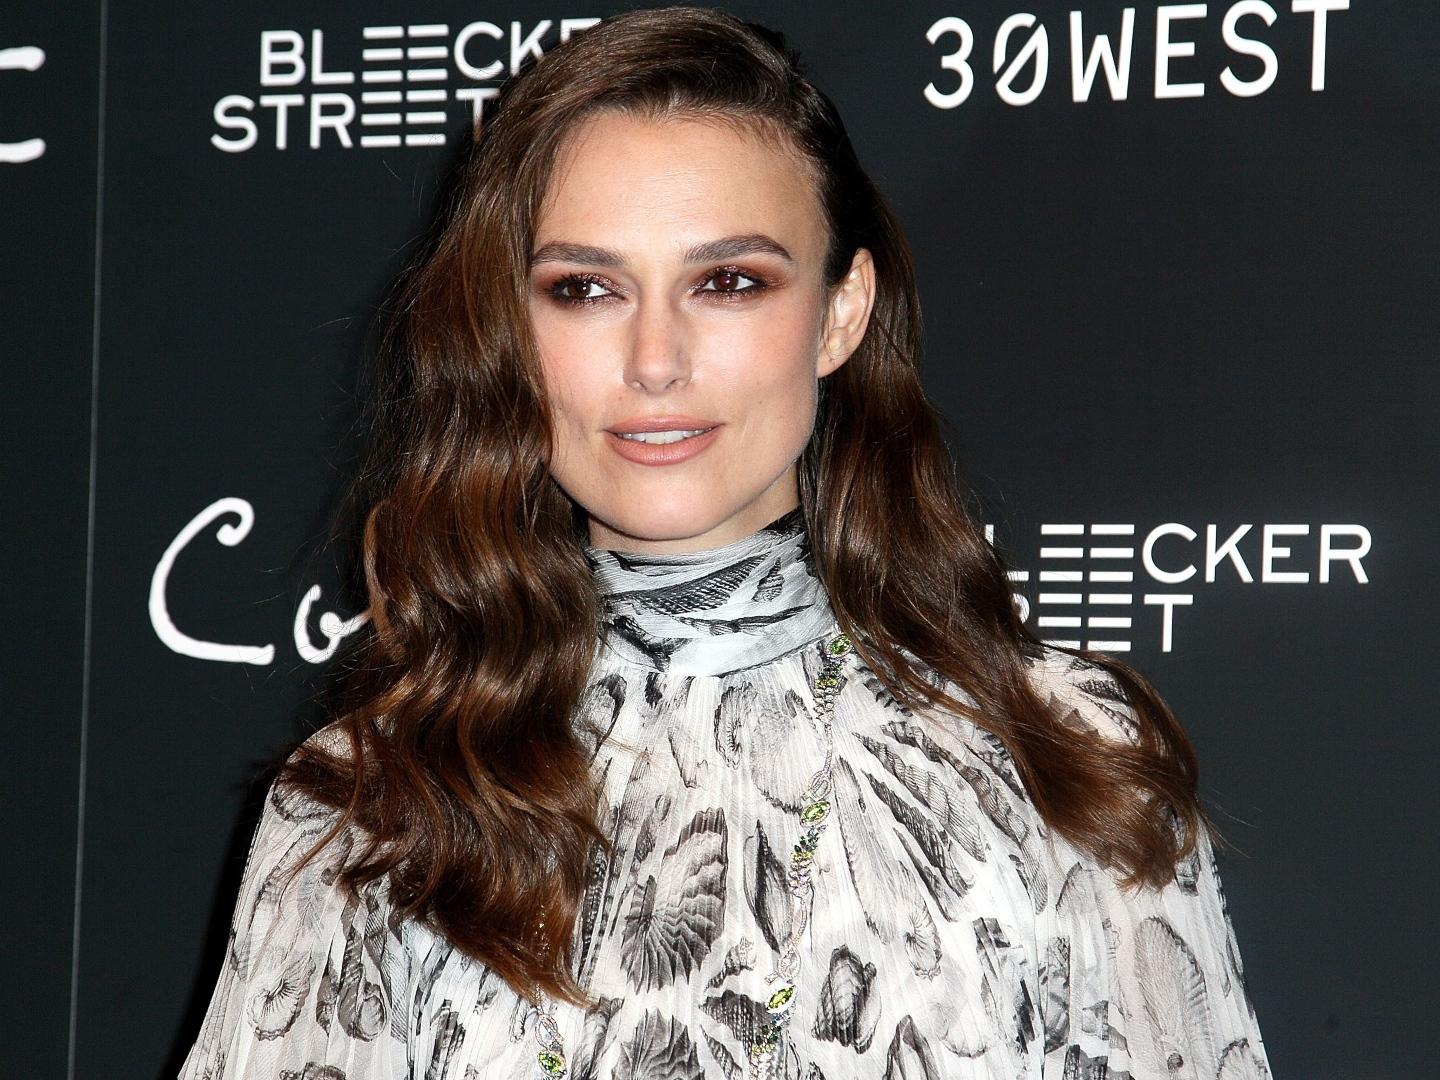 Keira Knightley Describes the Kind of ‘Greased Up’ Sex Scene She Won’t Ever Agree to Again